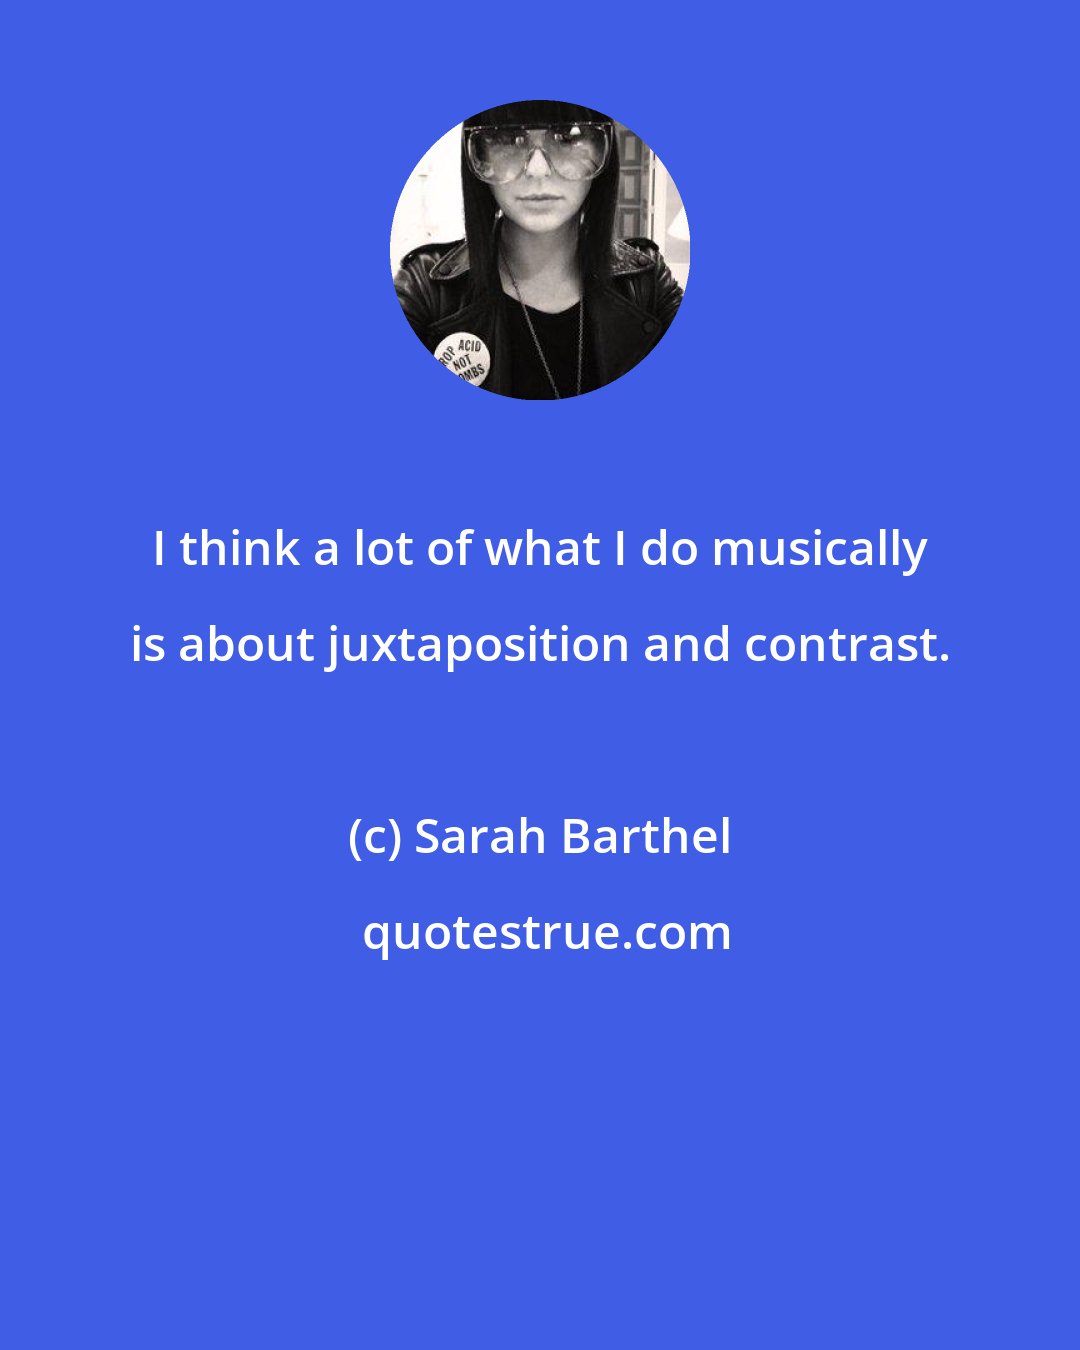 Sarah Barthel: I think a lot of what I do musically is about juxtaposition and contrast.